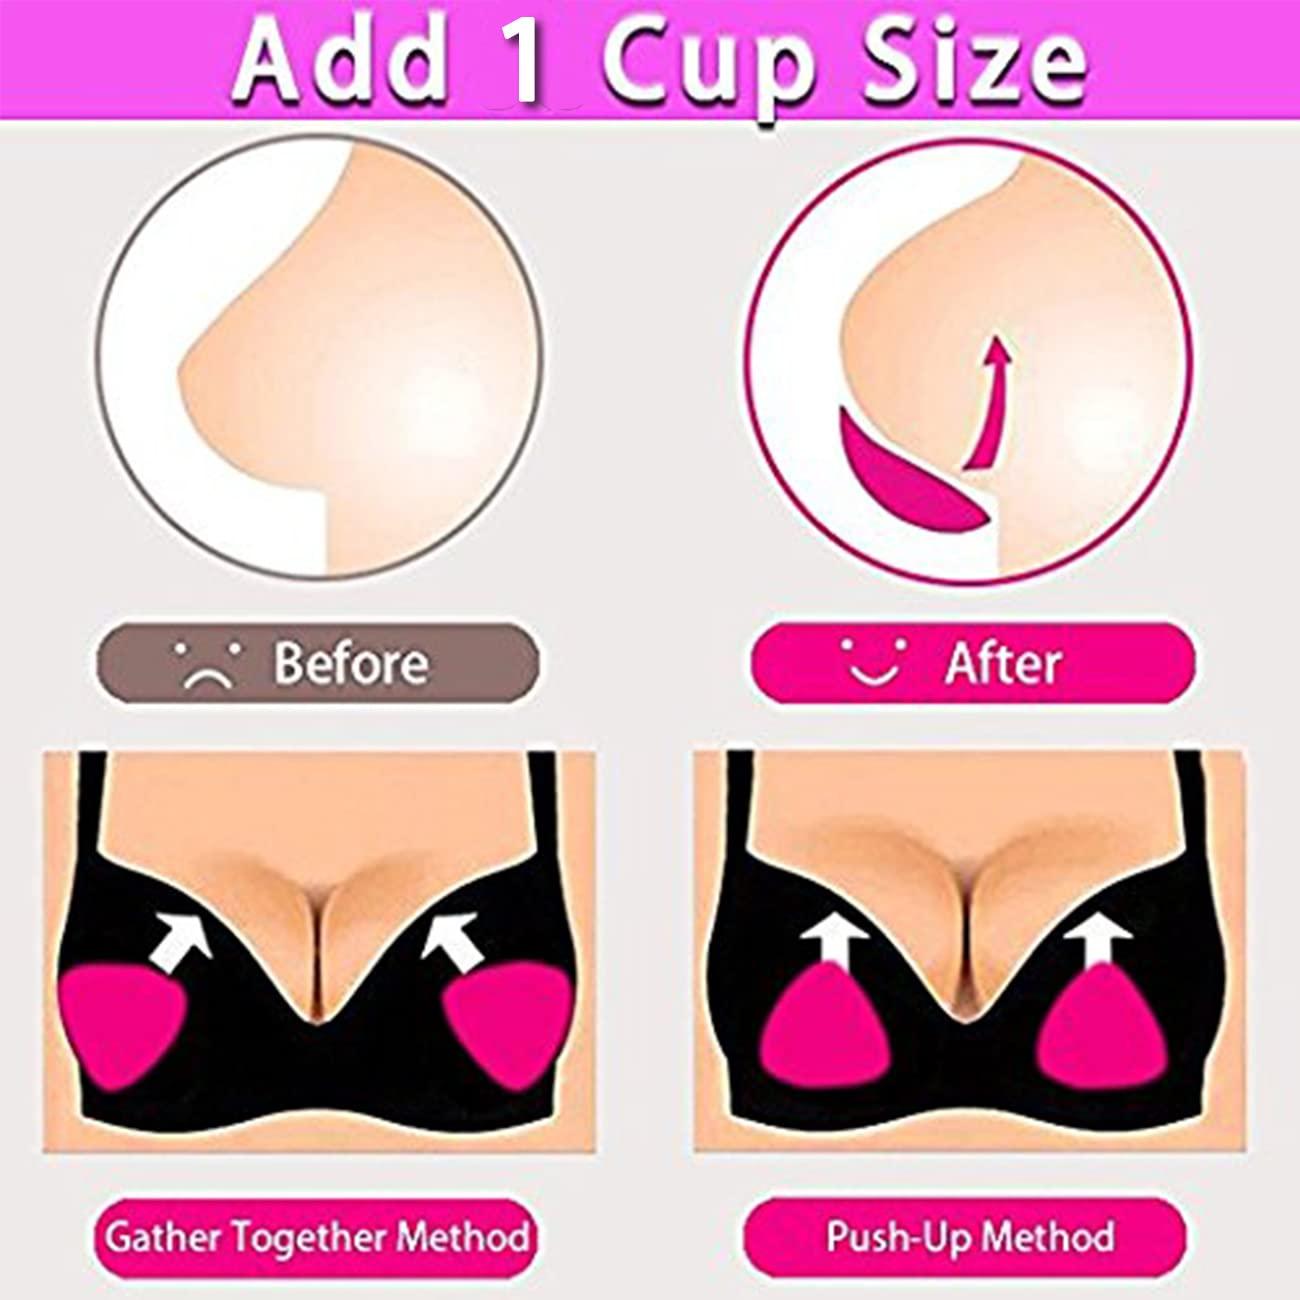 Silicone Push Up Bra Pad Insert Breast Enhancer Push Up Style A